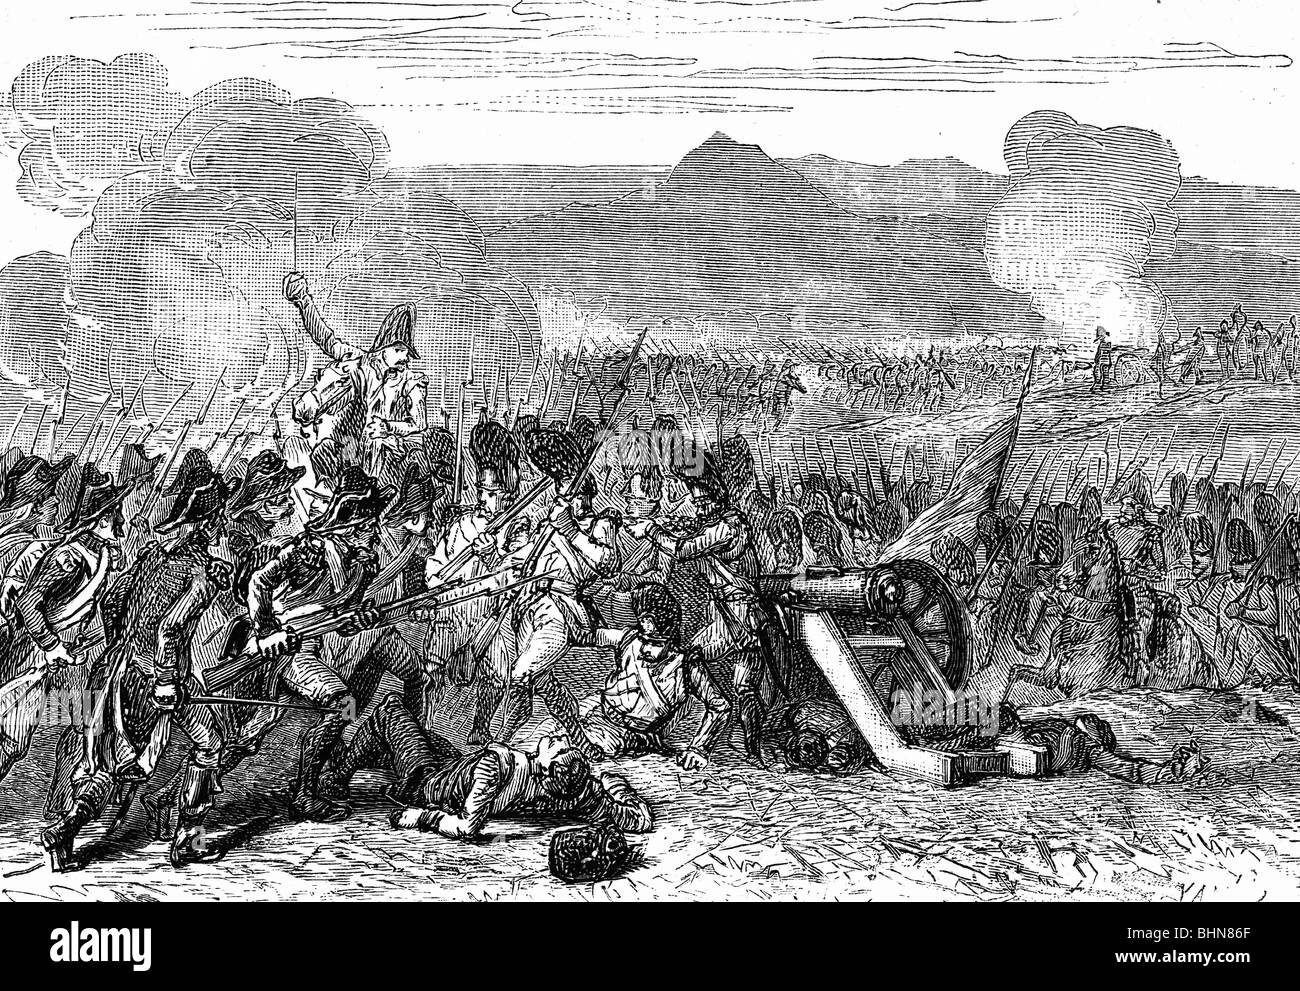 events, War of the Second Coalition 1799 - 1802, Battle of Cassano d'Adda, 27.4.1799, infantry in close combat, wood engraving, 19th century, Italy, French, Russian, Austrian, France, Russia, Austria, soldiers, French Revolutionary Wars, 18th century, Adda, Lombardy, historic, historical, people, Stock Photo